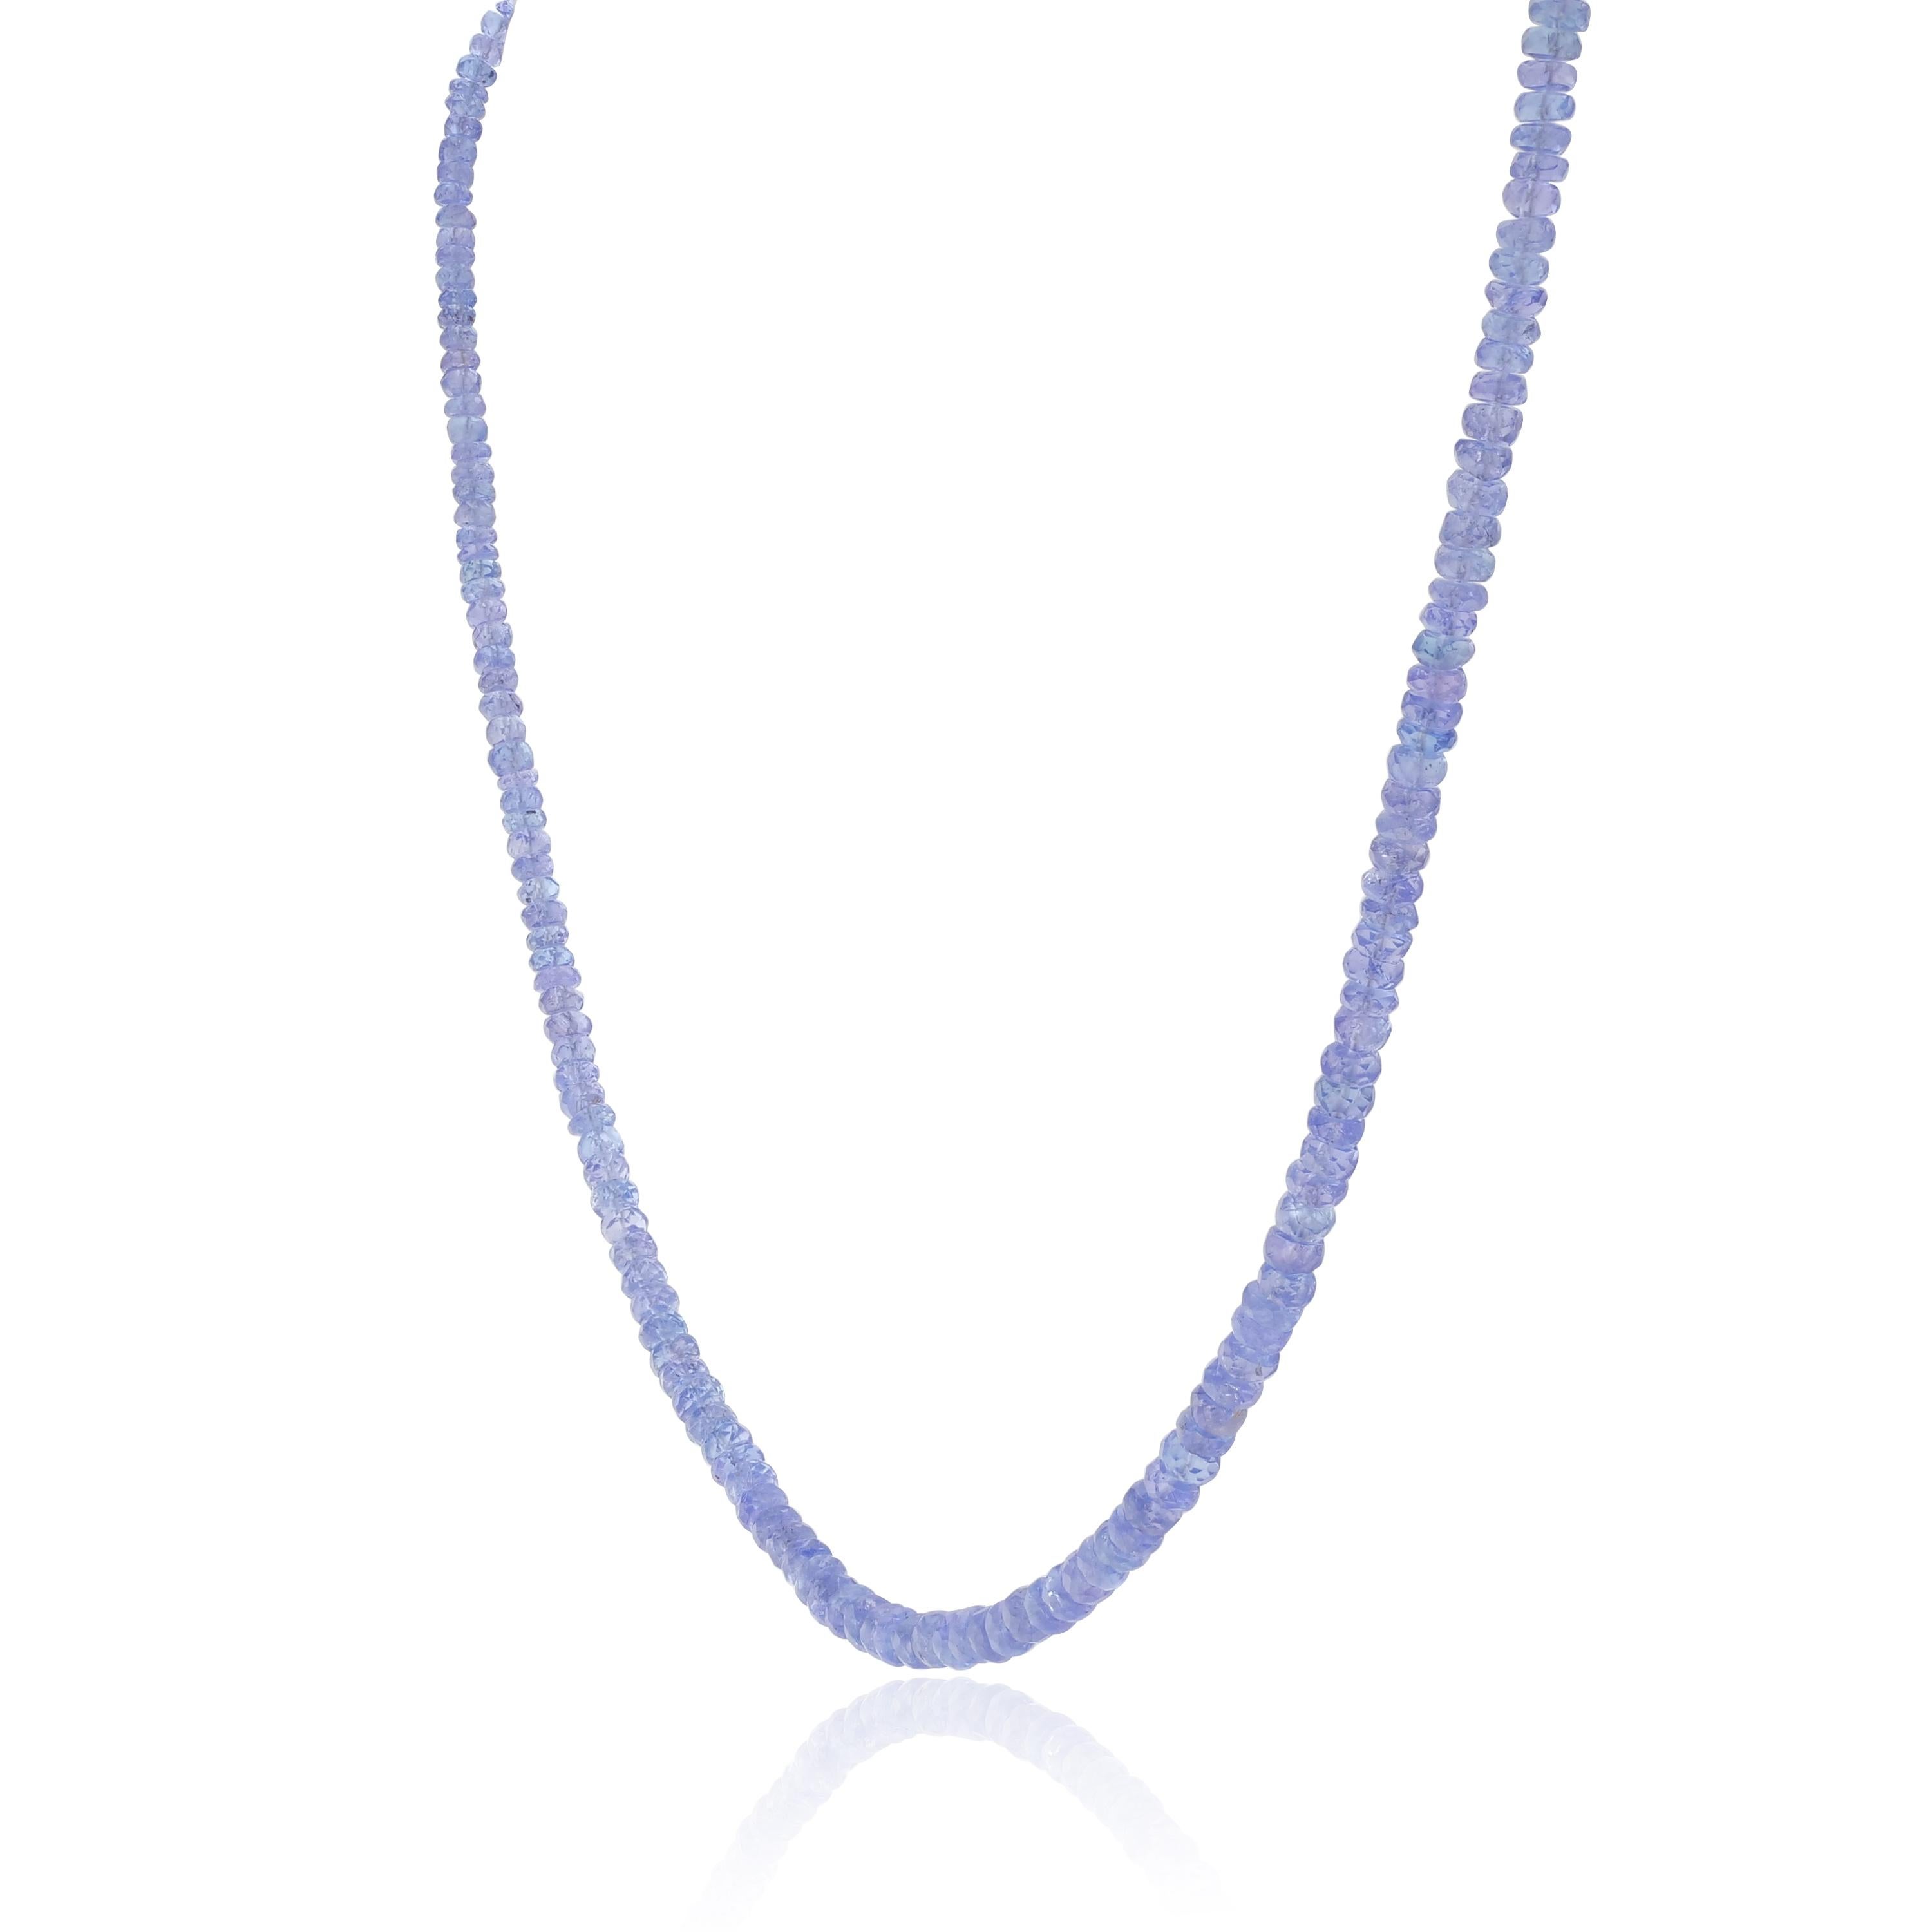 Modern Gemistry 56.57 Carat Tanzanite Beads Necklace in 925 Sterling Silver For Sale